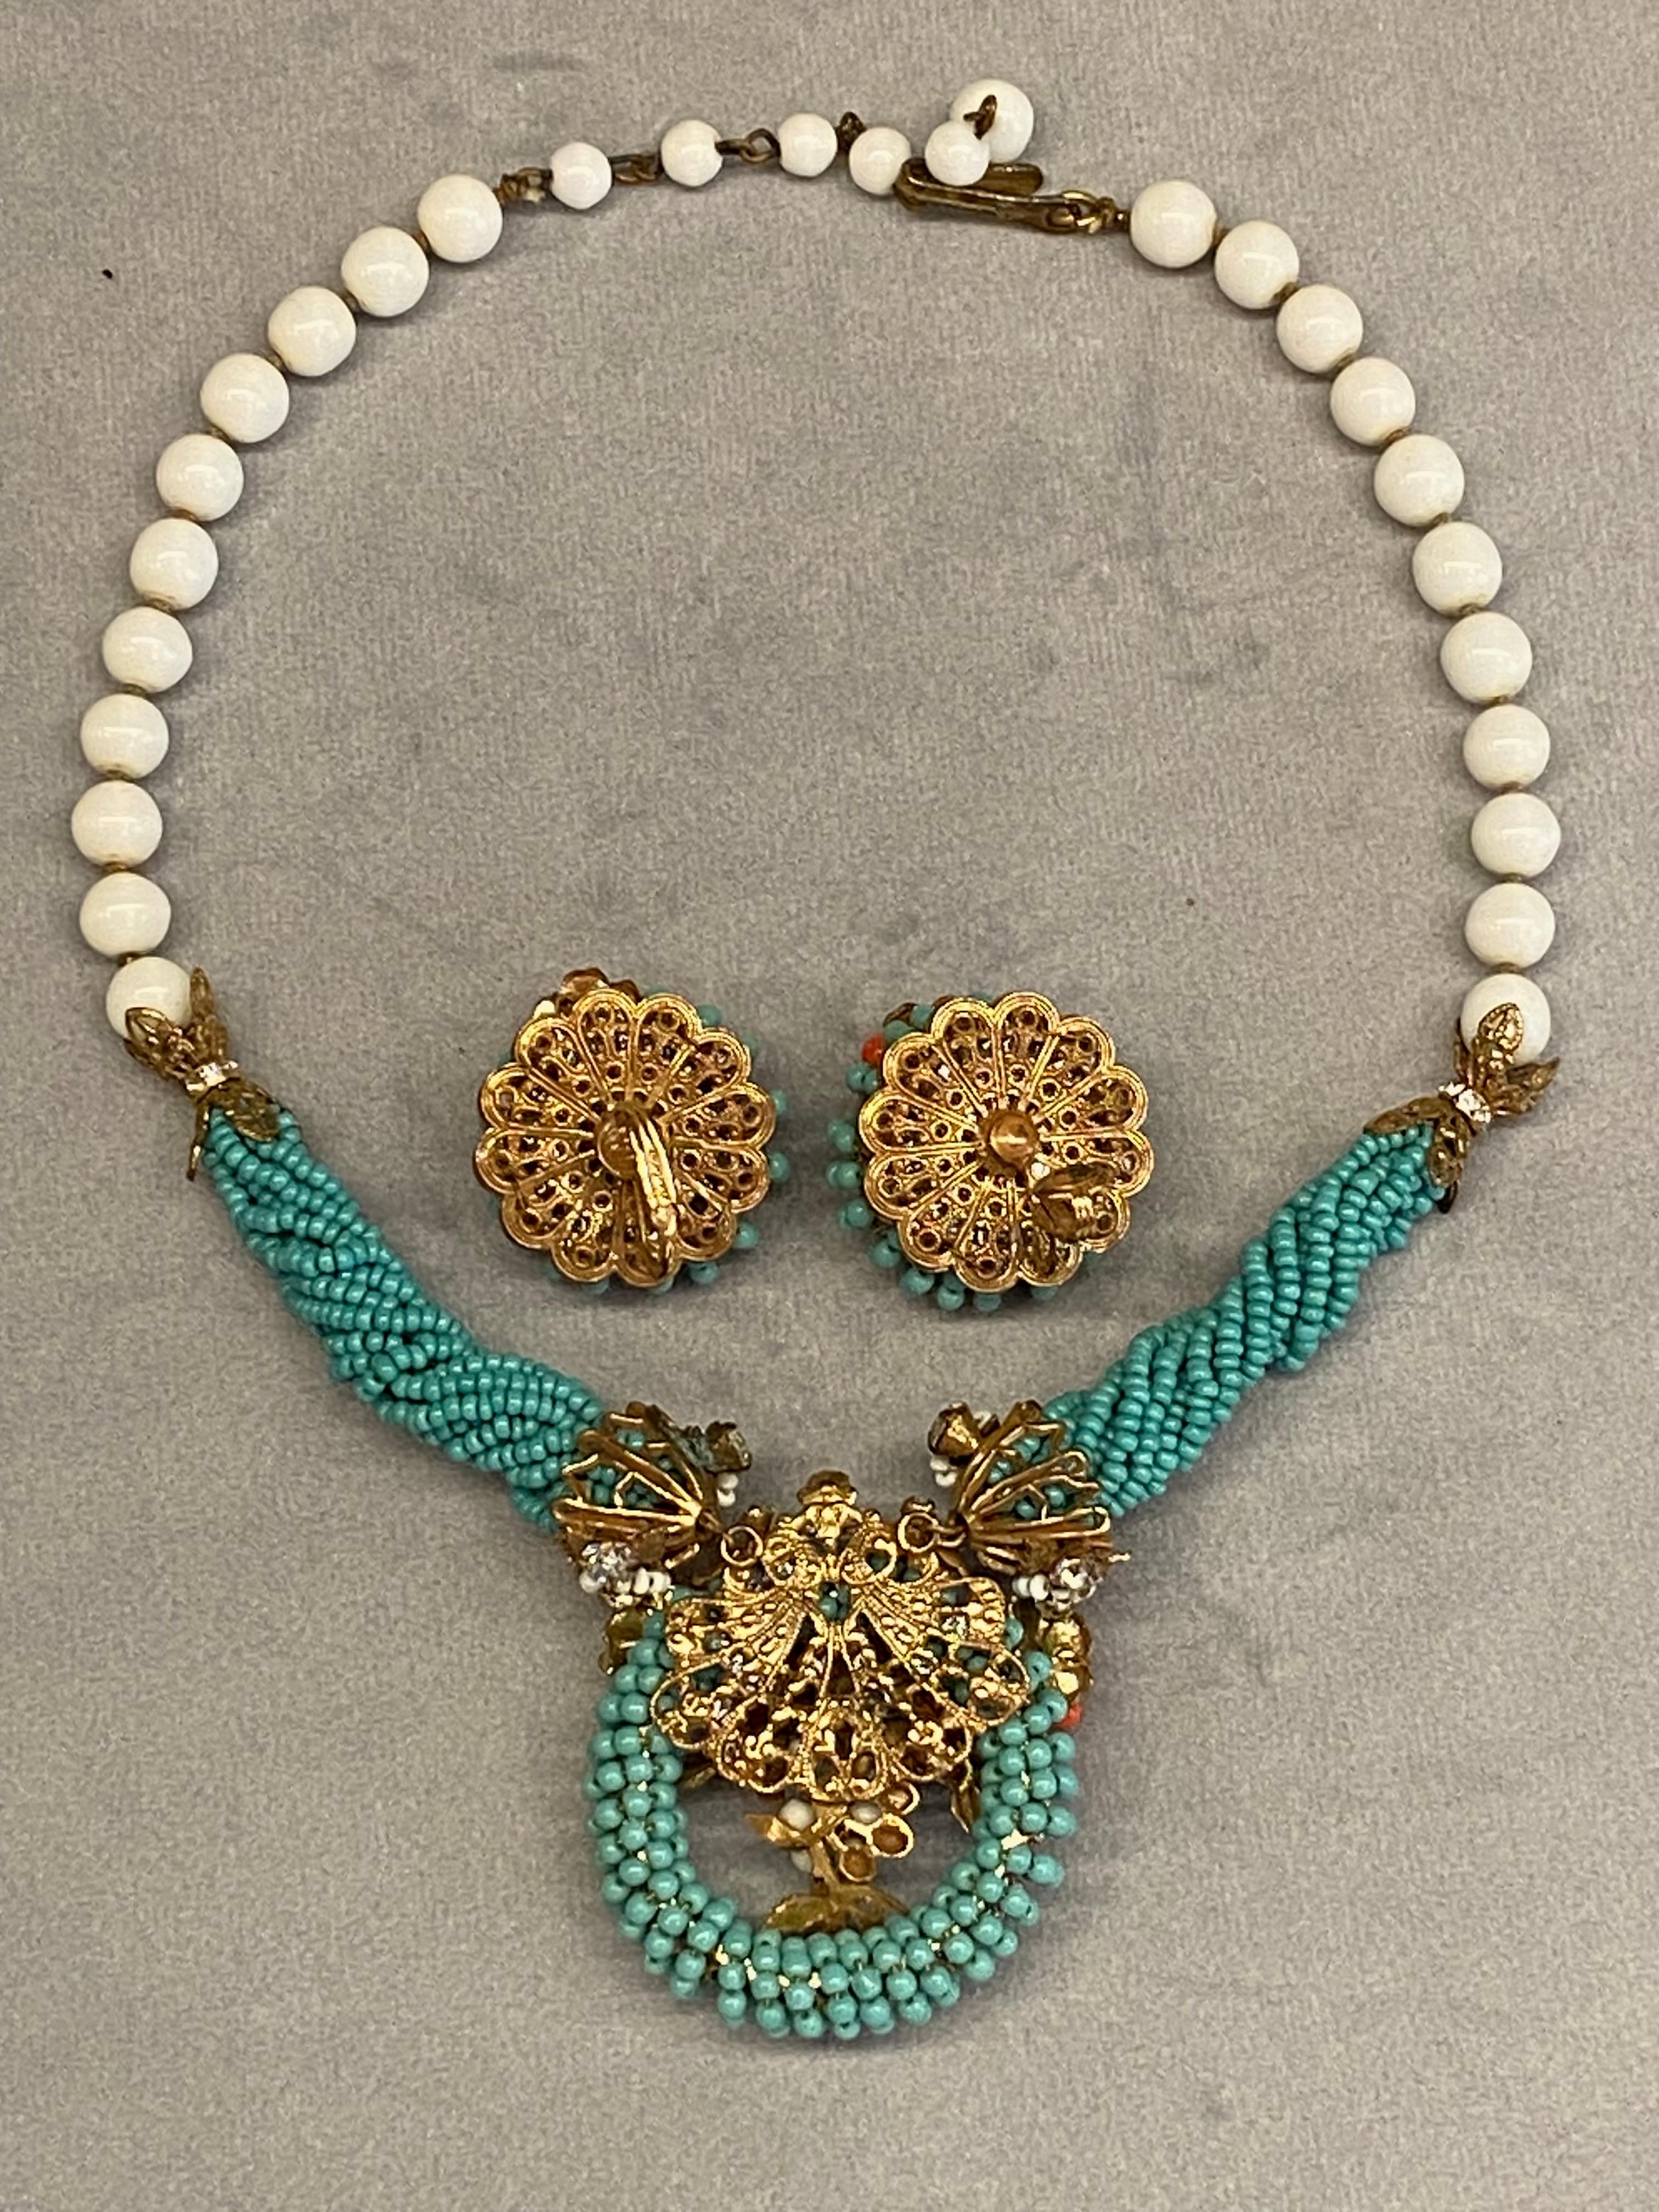 Original by Robert 1950s turquoise, coral & white glass beed necklace & earrings For Sale 5